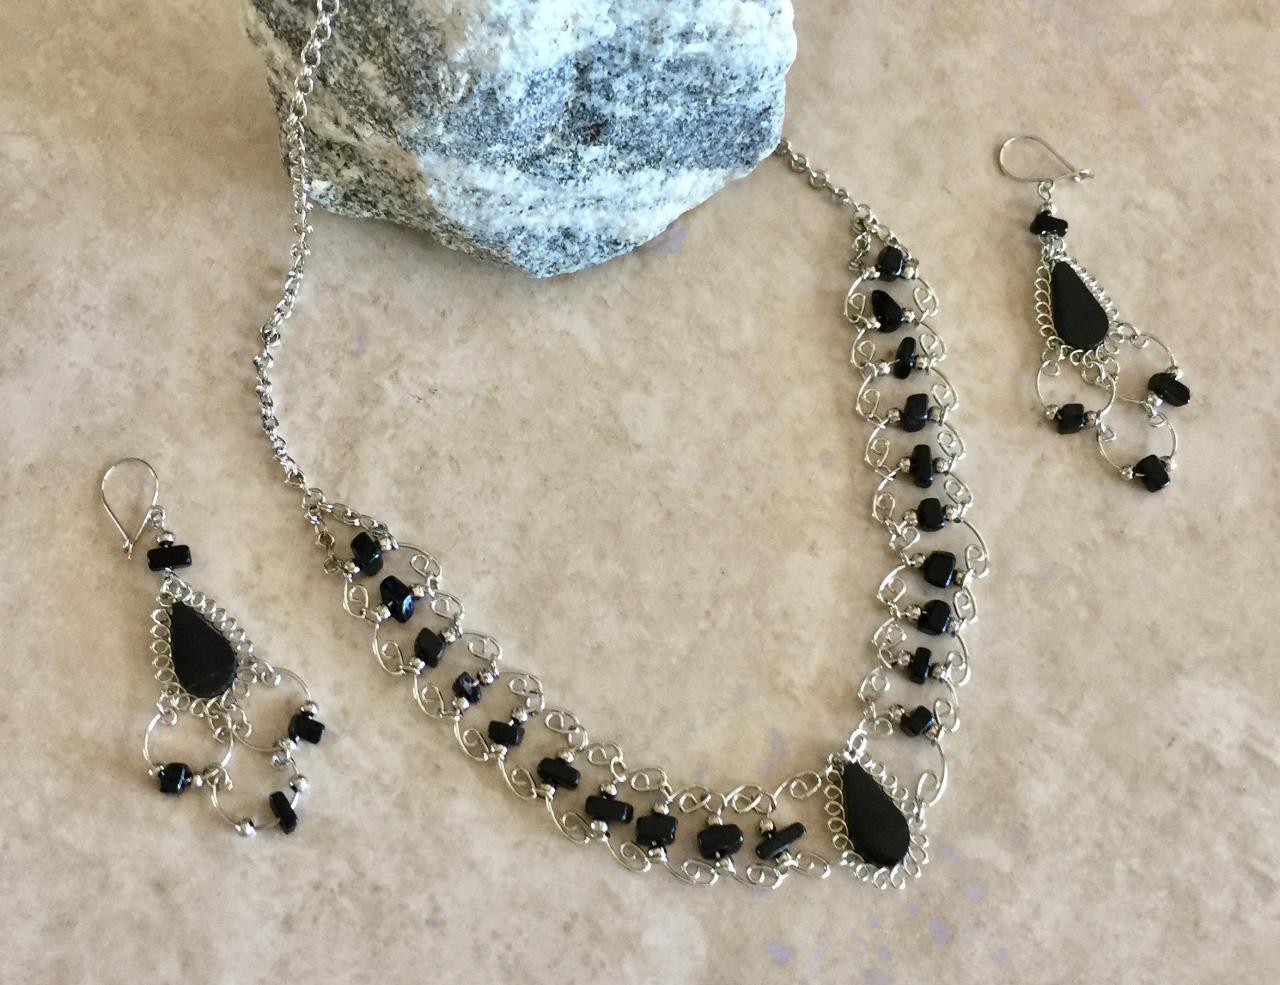 Black Onyx Necklace And Earrings, Blue Necklace, Alpaca Silver Necklace, Teardrop Necklace, Nuggets, Handmade Necklace, Lightweight Neck